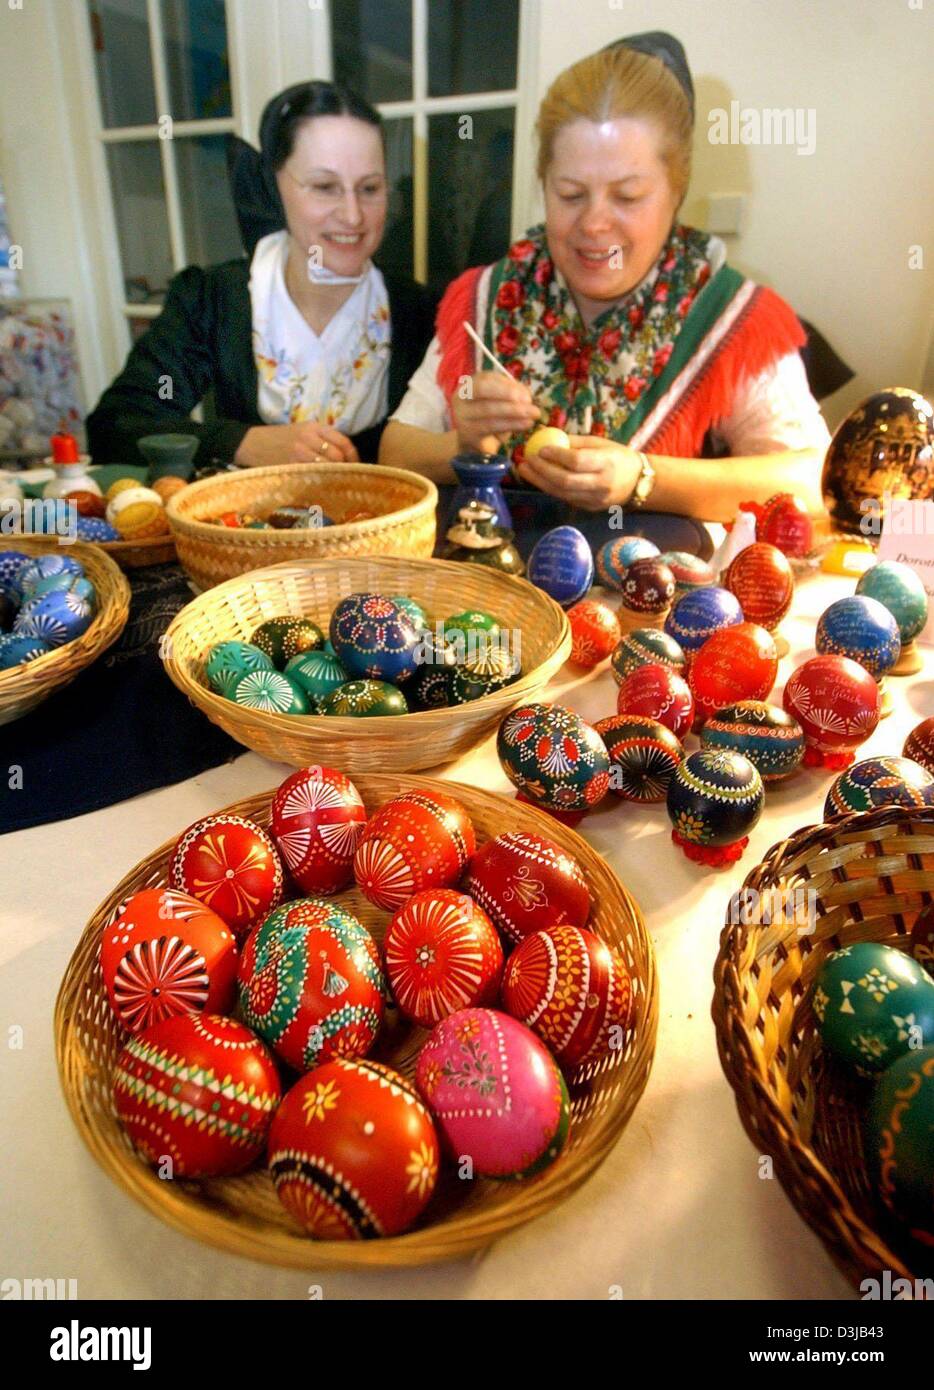 (dpa) - Dorothea Tschoeke (R) paints colourful Sorbian Easter eggs while Elisabeth Sende looks on in Bautzen, Germany, 7 March 2004. 39 folk artists from around Berlin and Lusatia present the different techniques of decorating eggs for the Easter season. Stock Photo